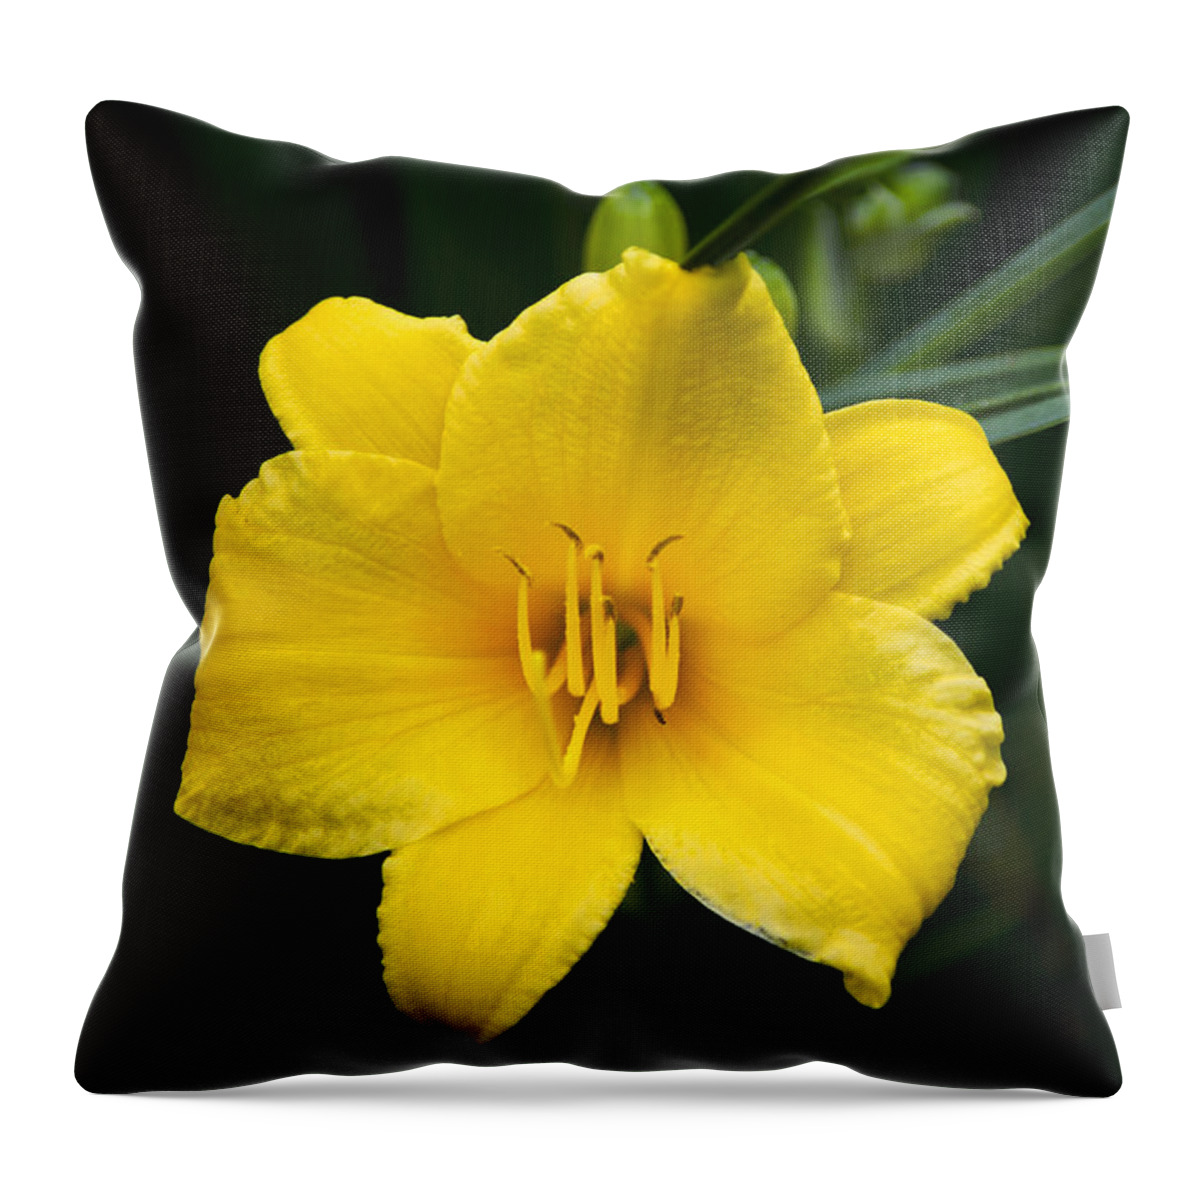 Daylily Throw Pillow featuring the photograph Yellow Daylily Flower by Christina Rollo